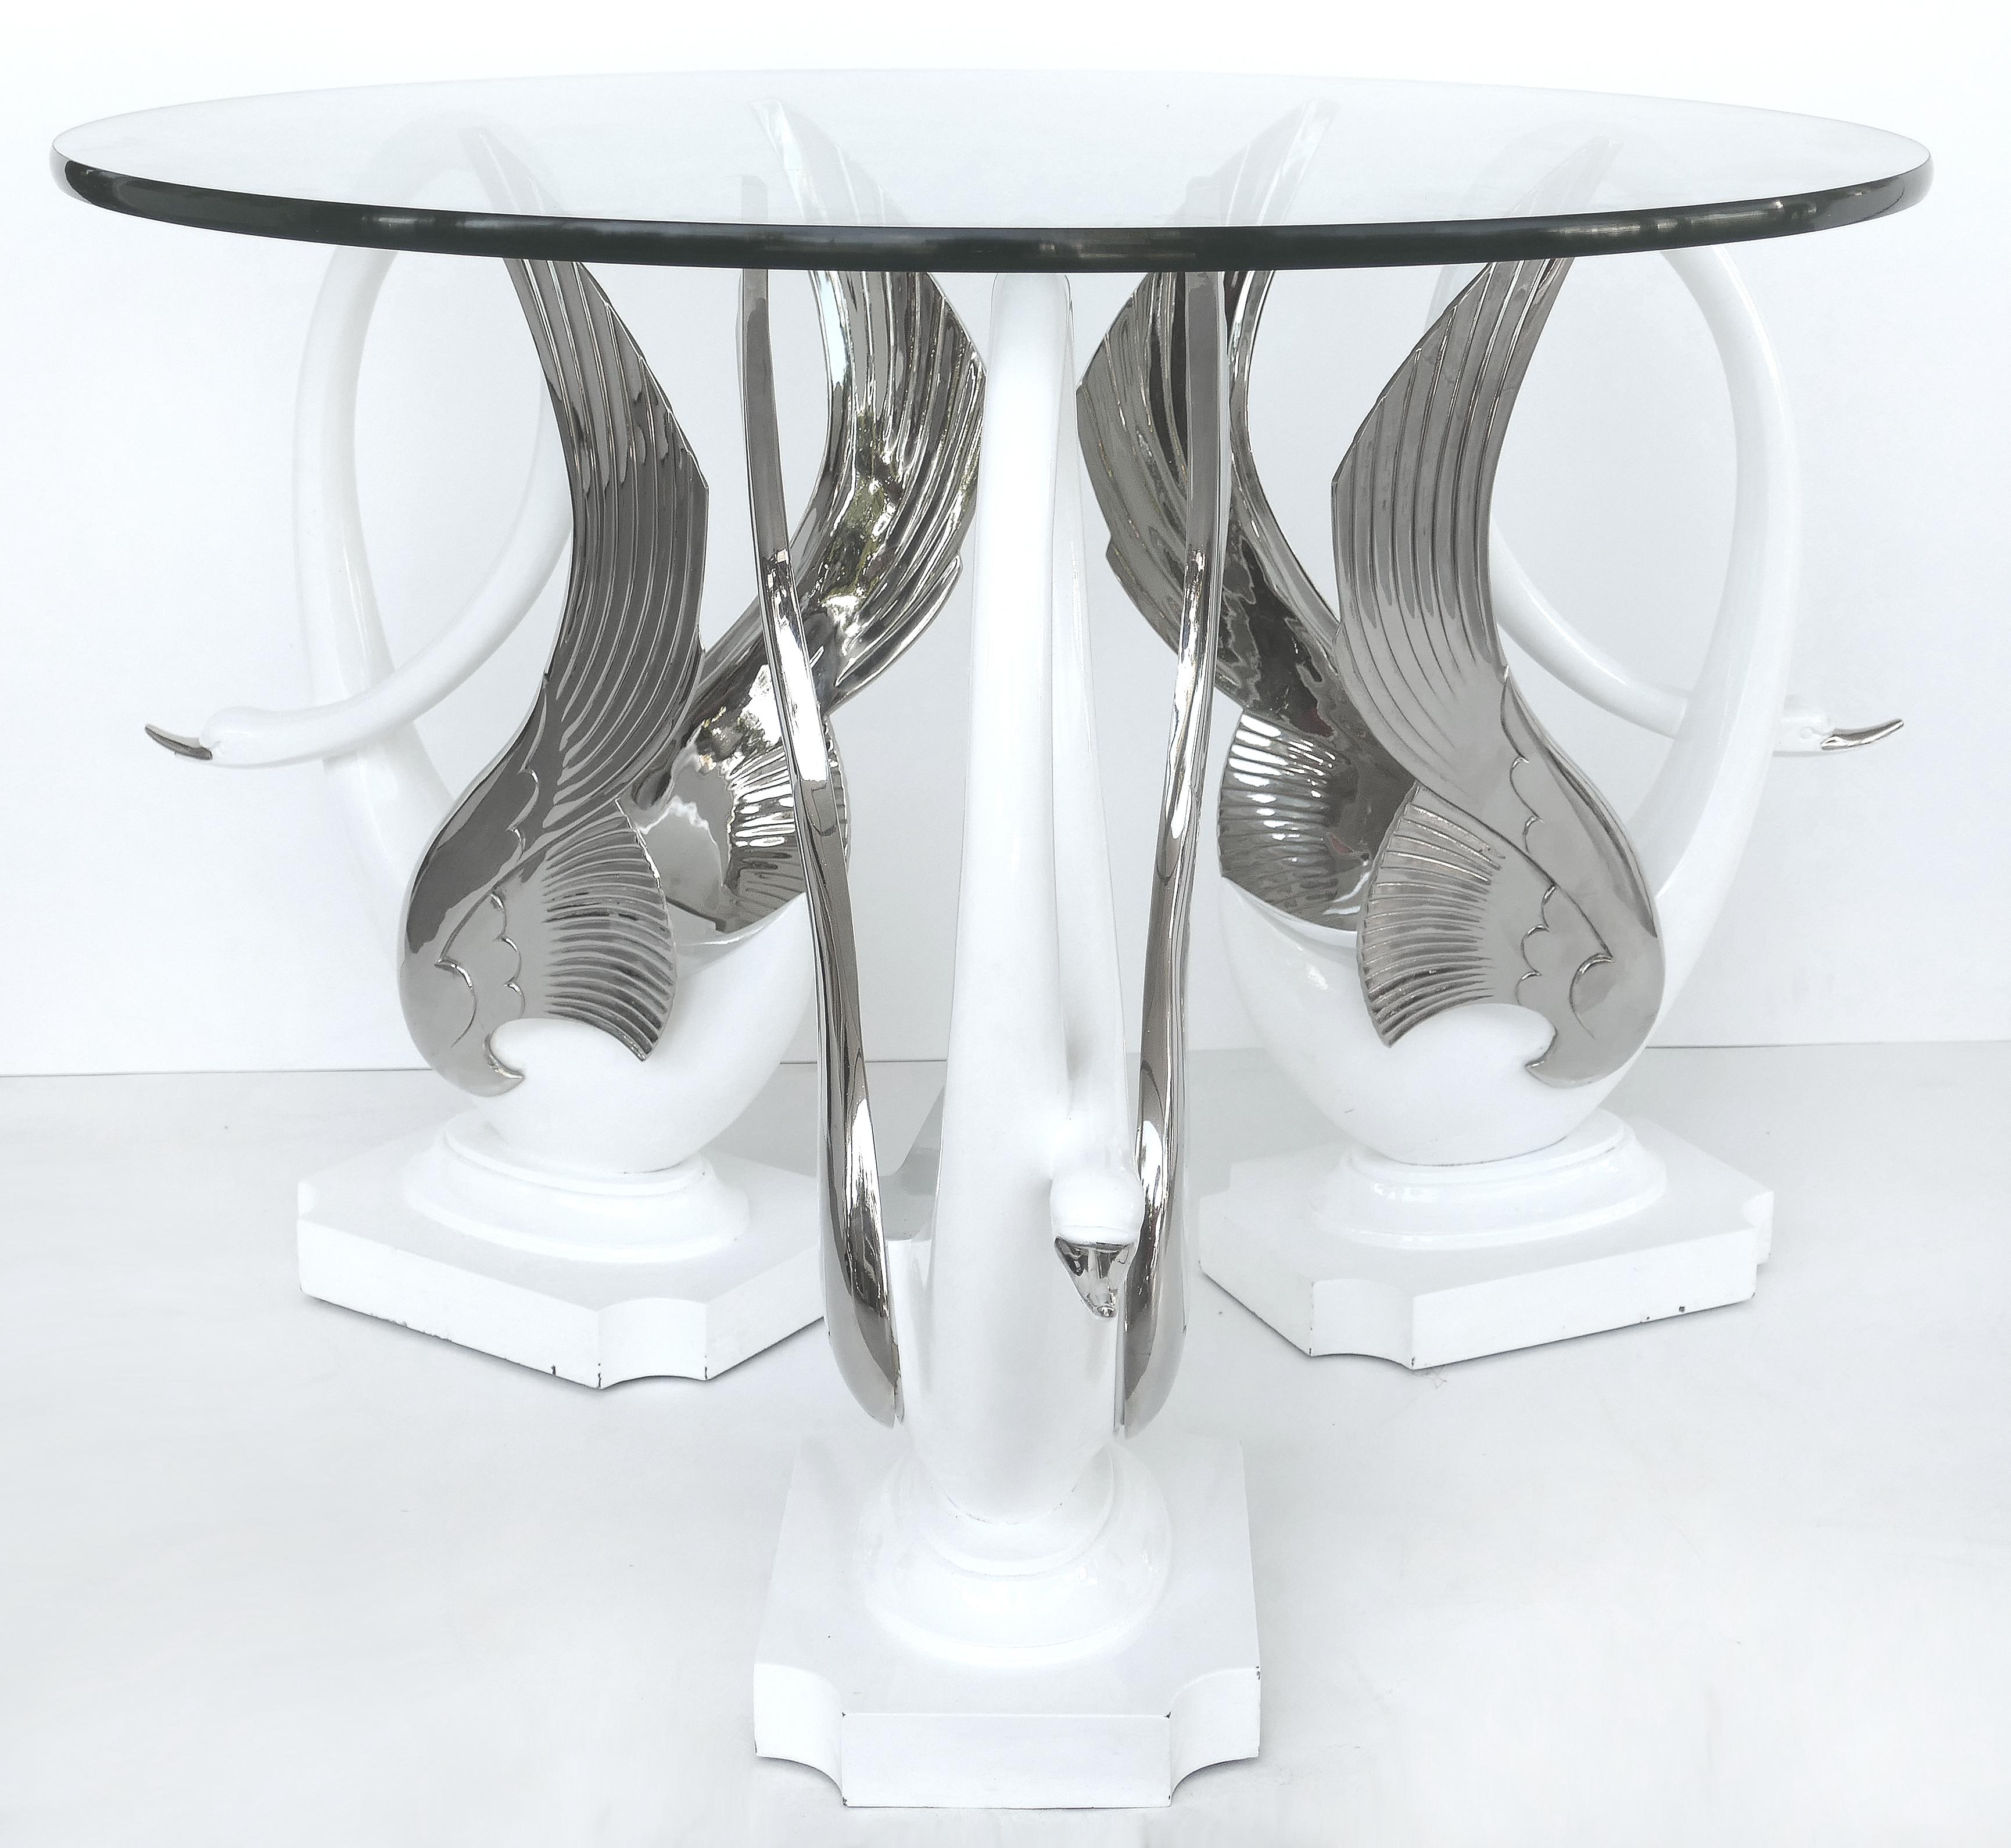 Swan center/side table in resin with silver bases and round glass top

Offered for sale is a 